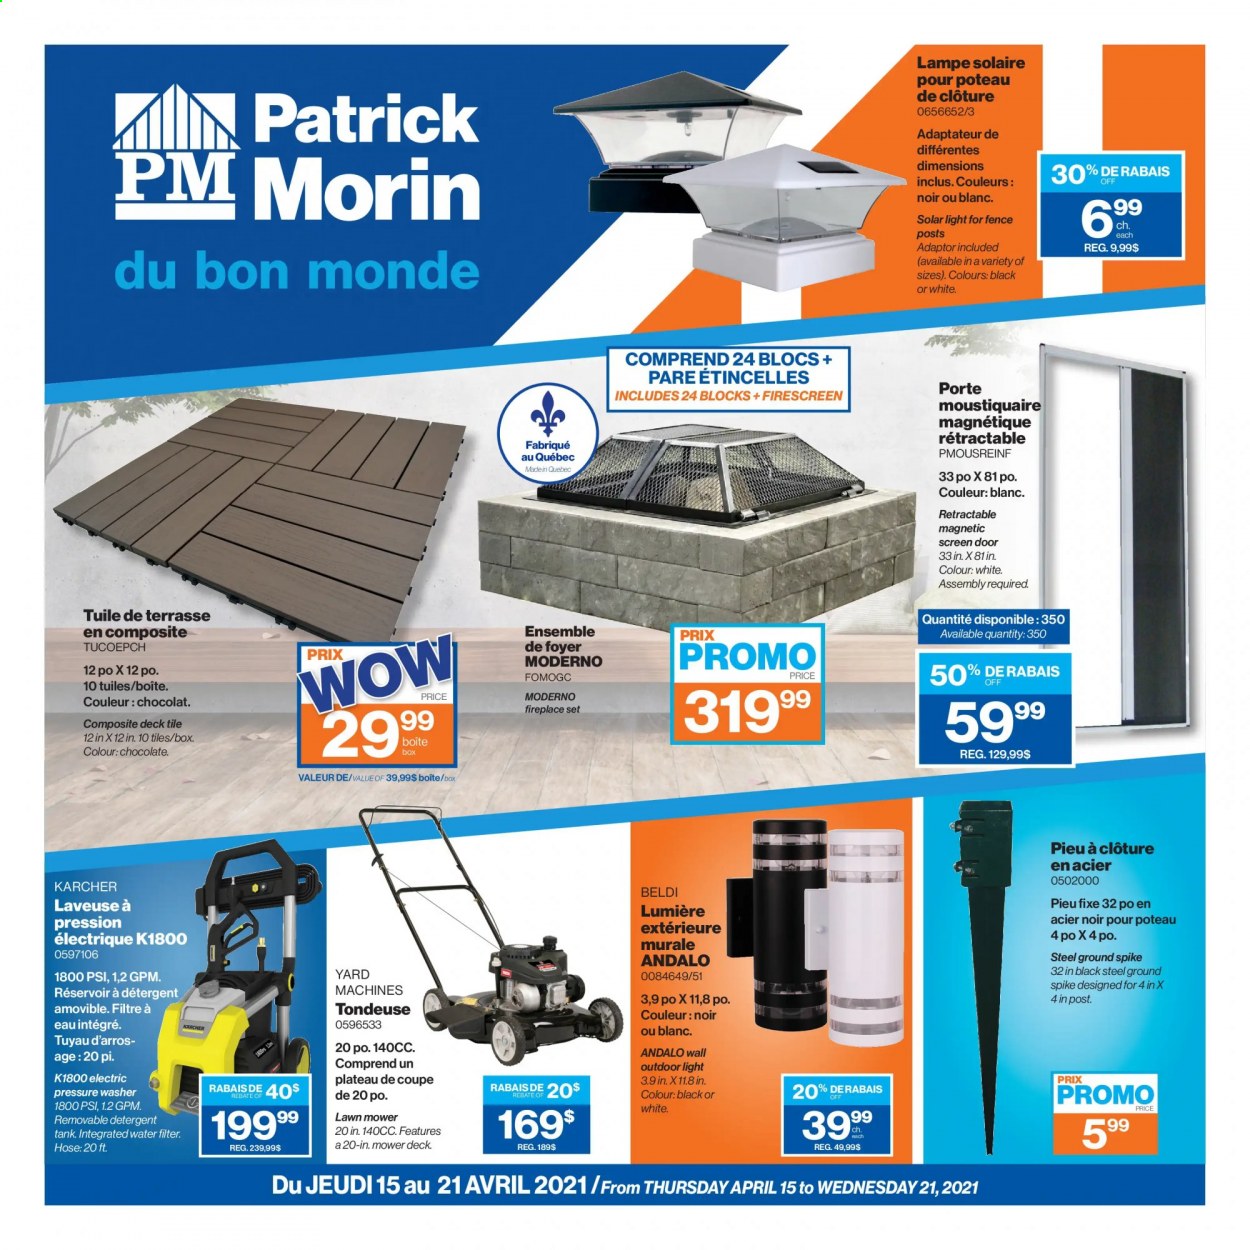 thumbnail - Patrick Morin Flyer - April 15, 2021 - April 21, 2021 - Sales products - solar light, fireplace, lawn mower, pressure washer, Kärcher, water filter, tank. Page 1.